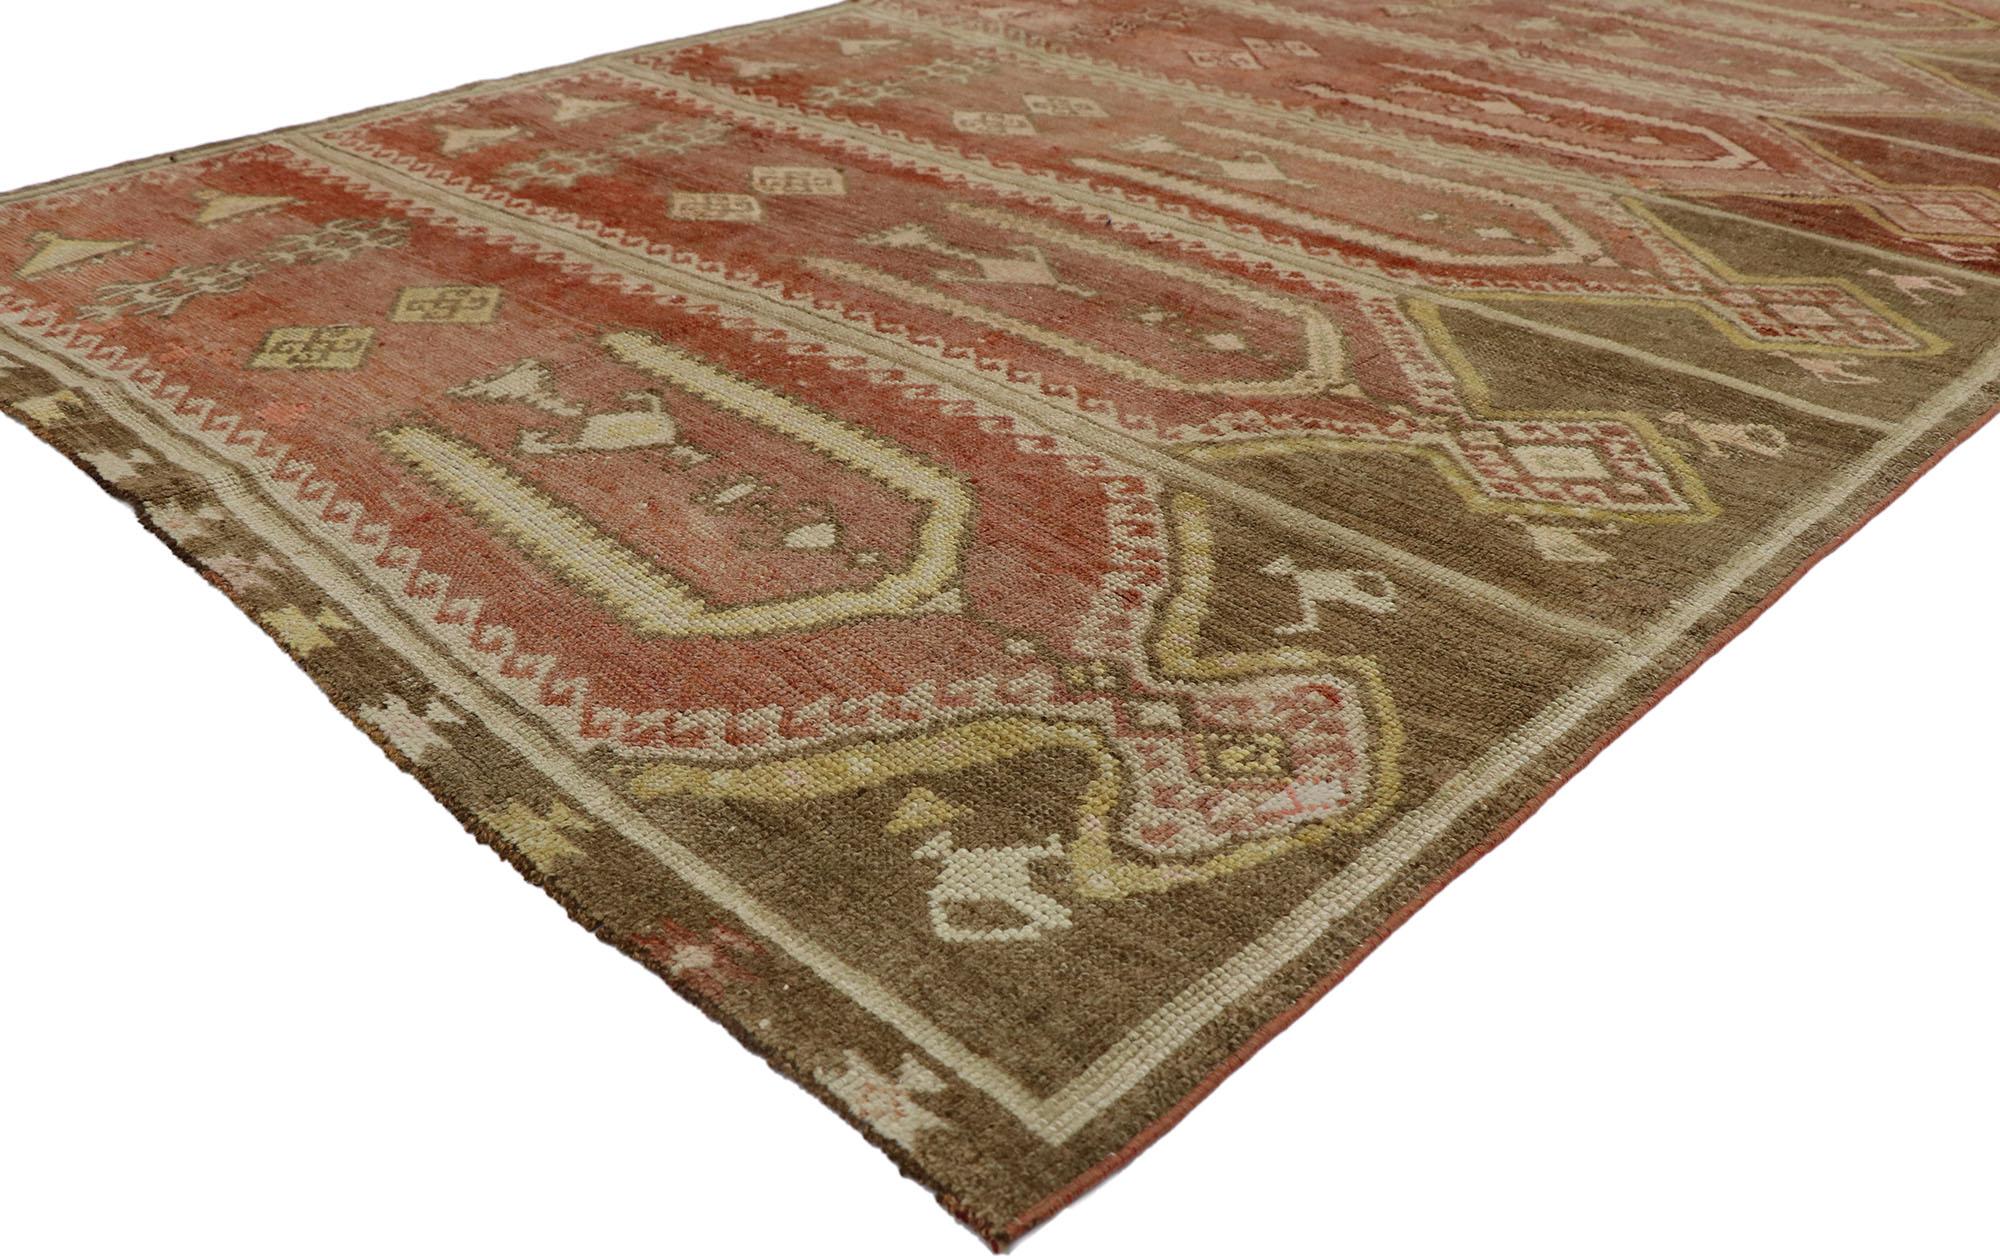 53580 Vintage Turkish Saph Prayer rug with Modern Rustic Style 05'07 x 09'03. 

Warm earth-tone colors and Modern style collide in this hand knotted vintage Anatolian Saph runner. The directional Turkish prayer rug beautifully displays six